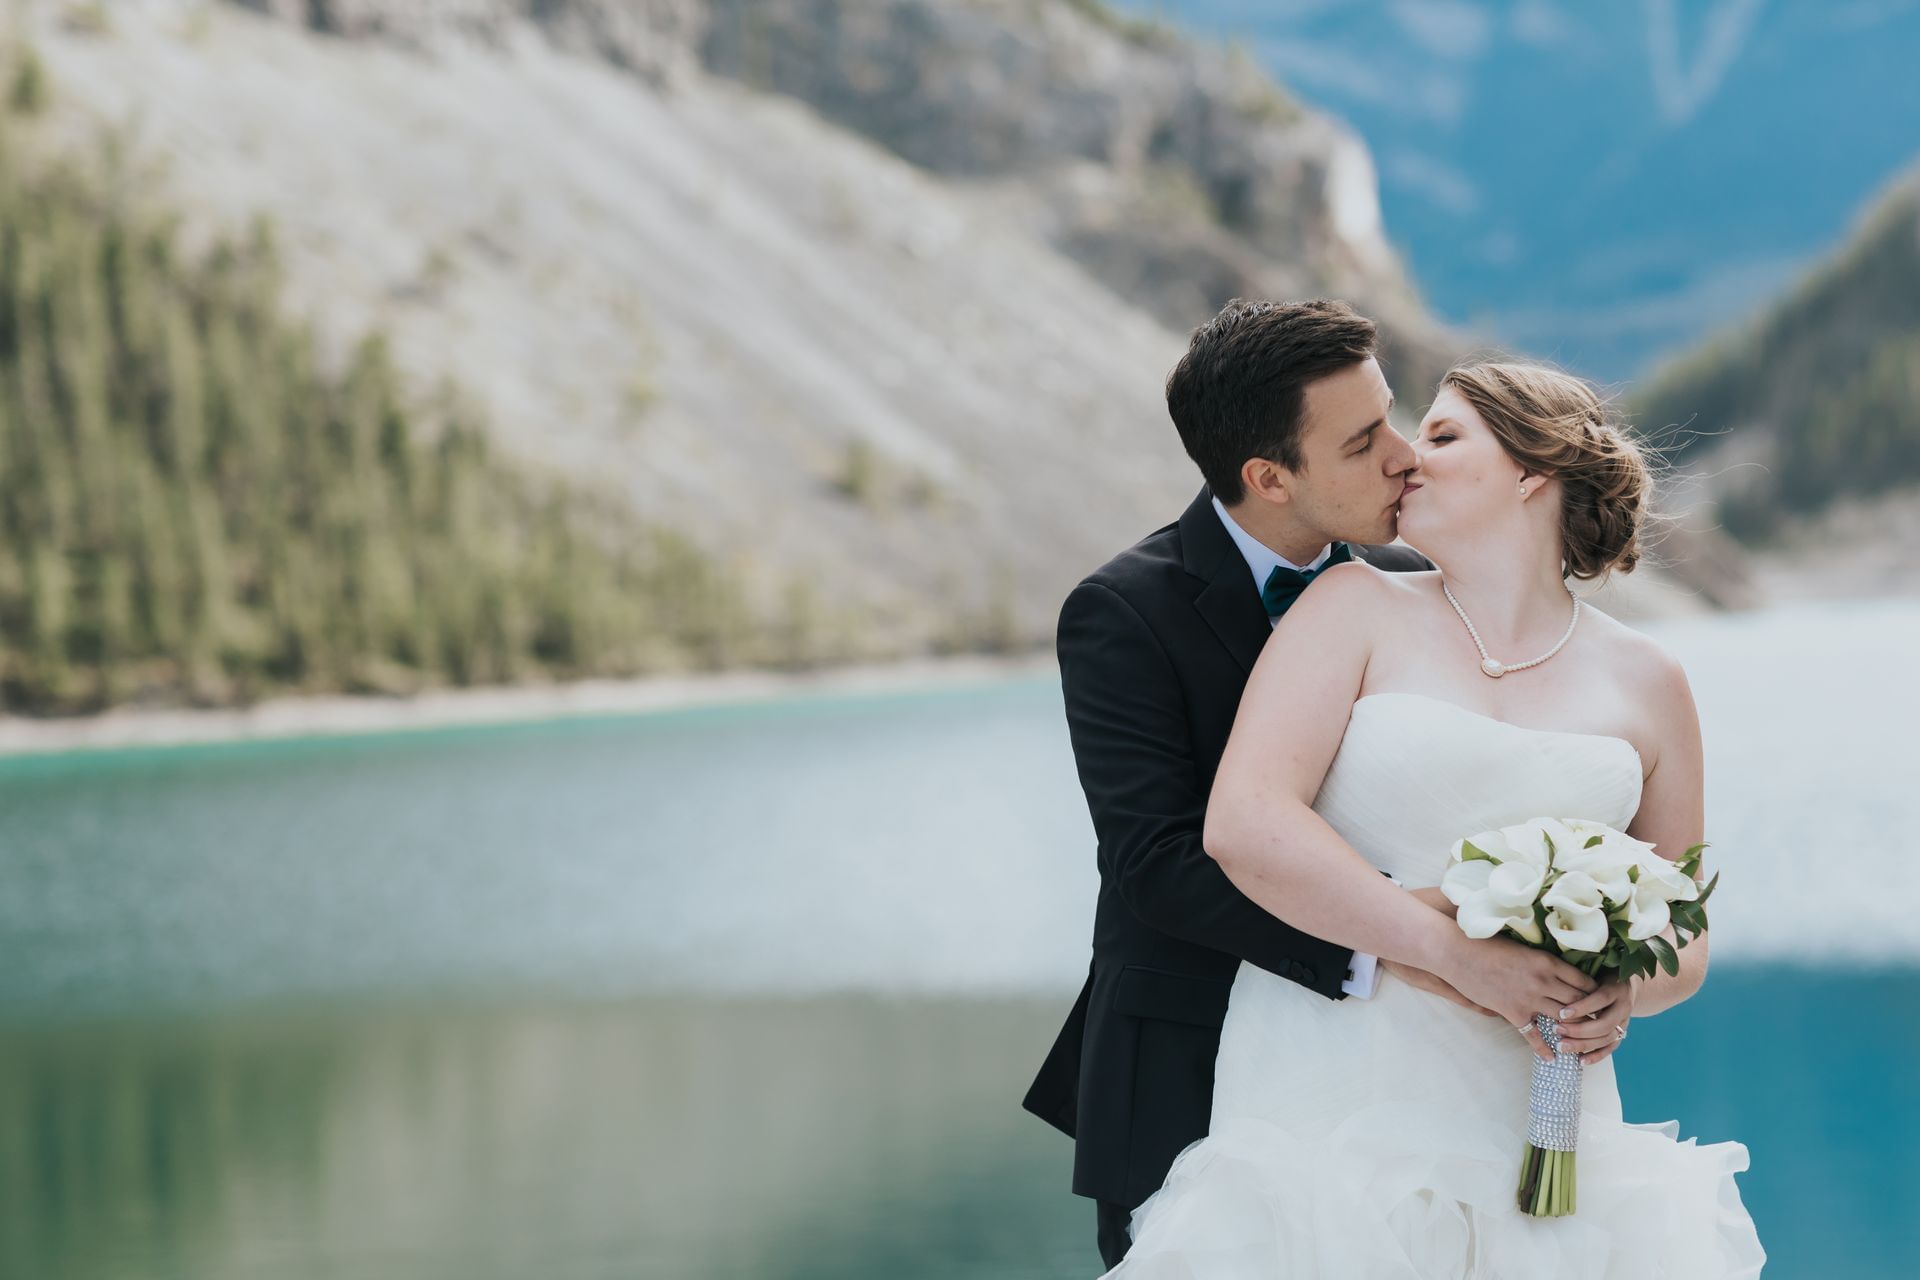 Bride and groom kissing in front of lake and mountains